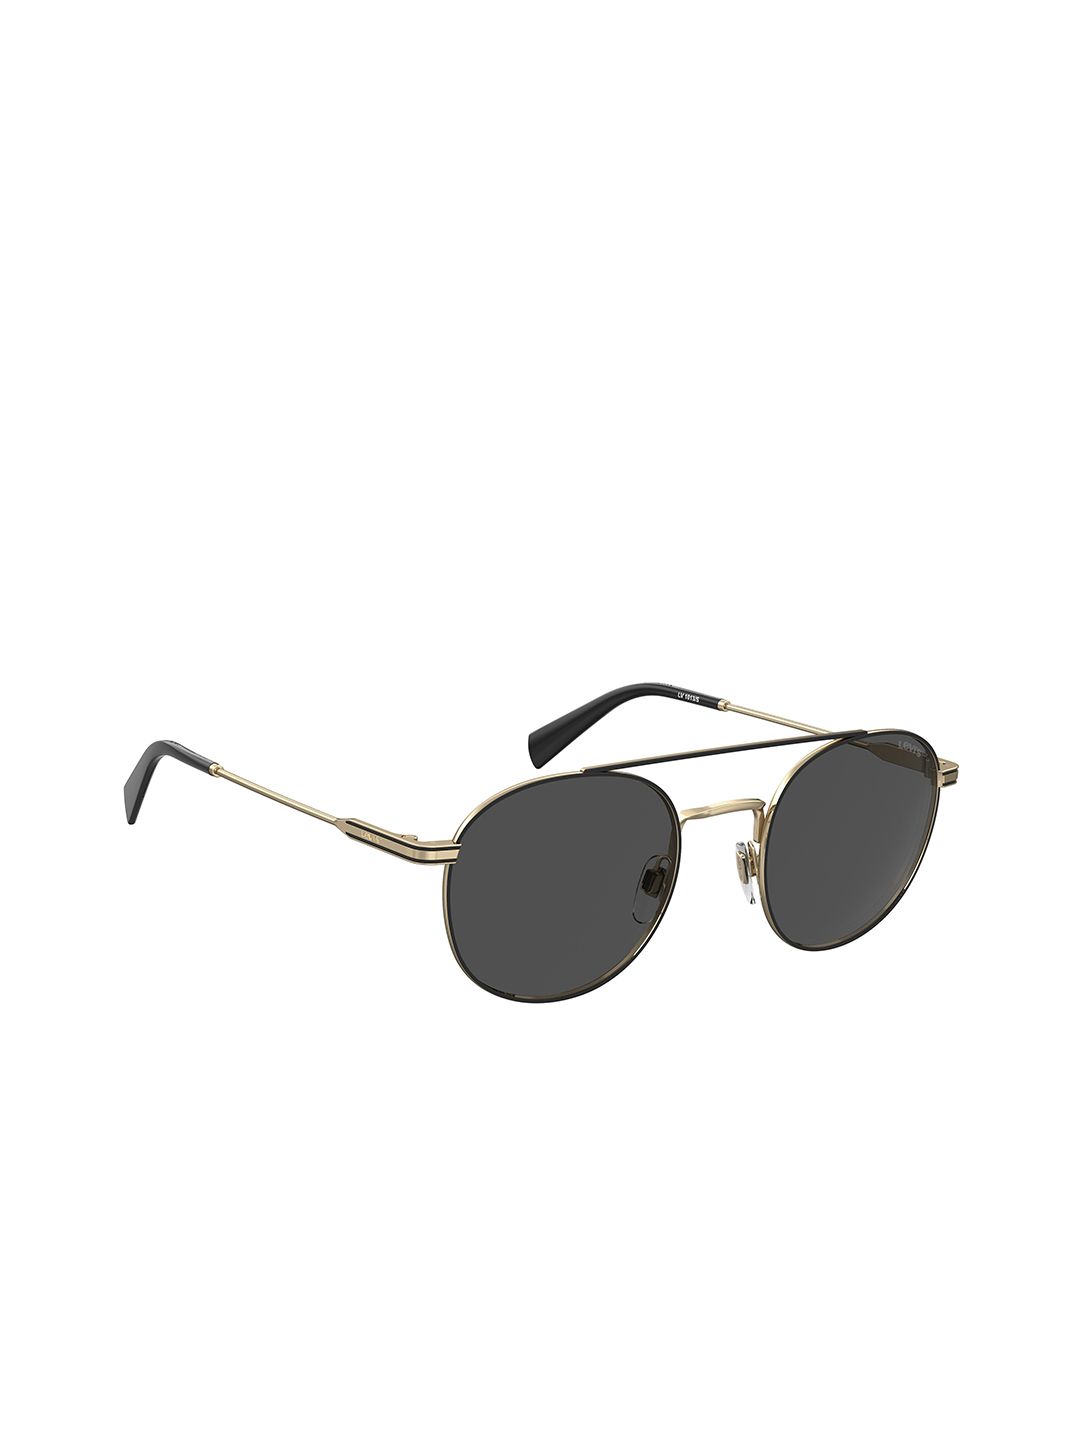 Levis Unisex Grey Lens & Gold-Toned UV Protected Round Sunglasses LV 1013/S J5G 54IR- Price in India